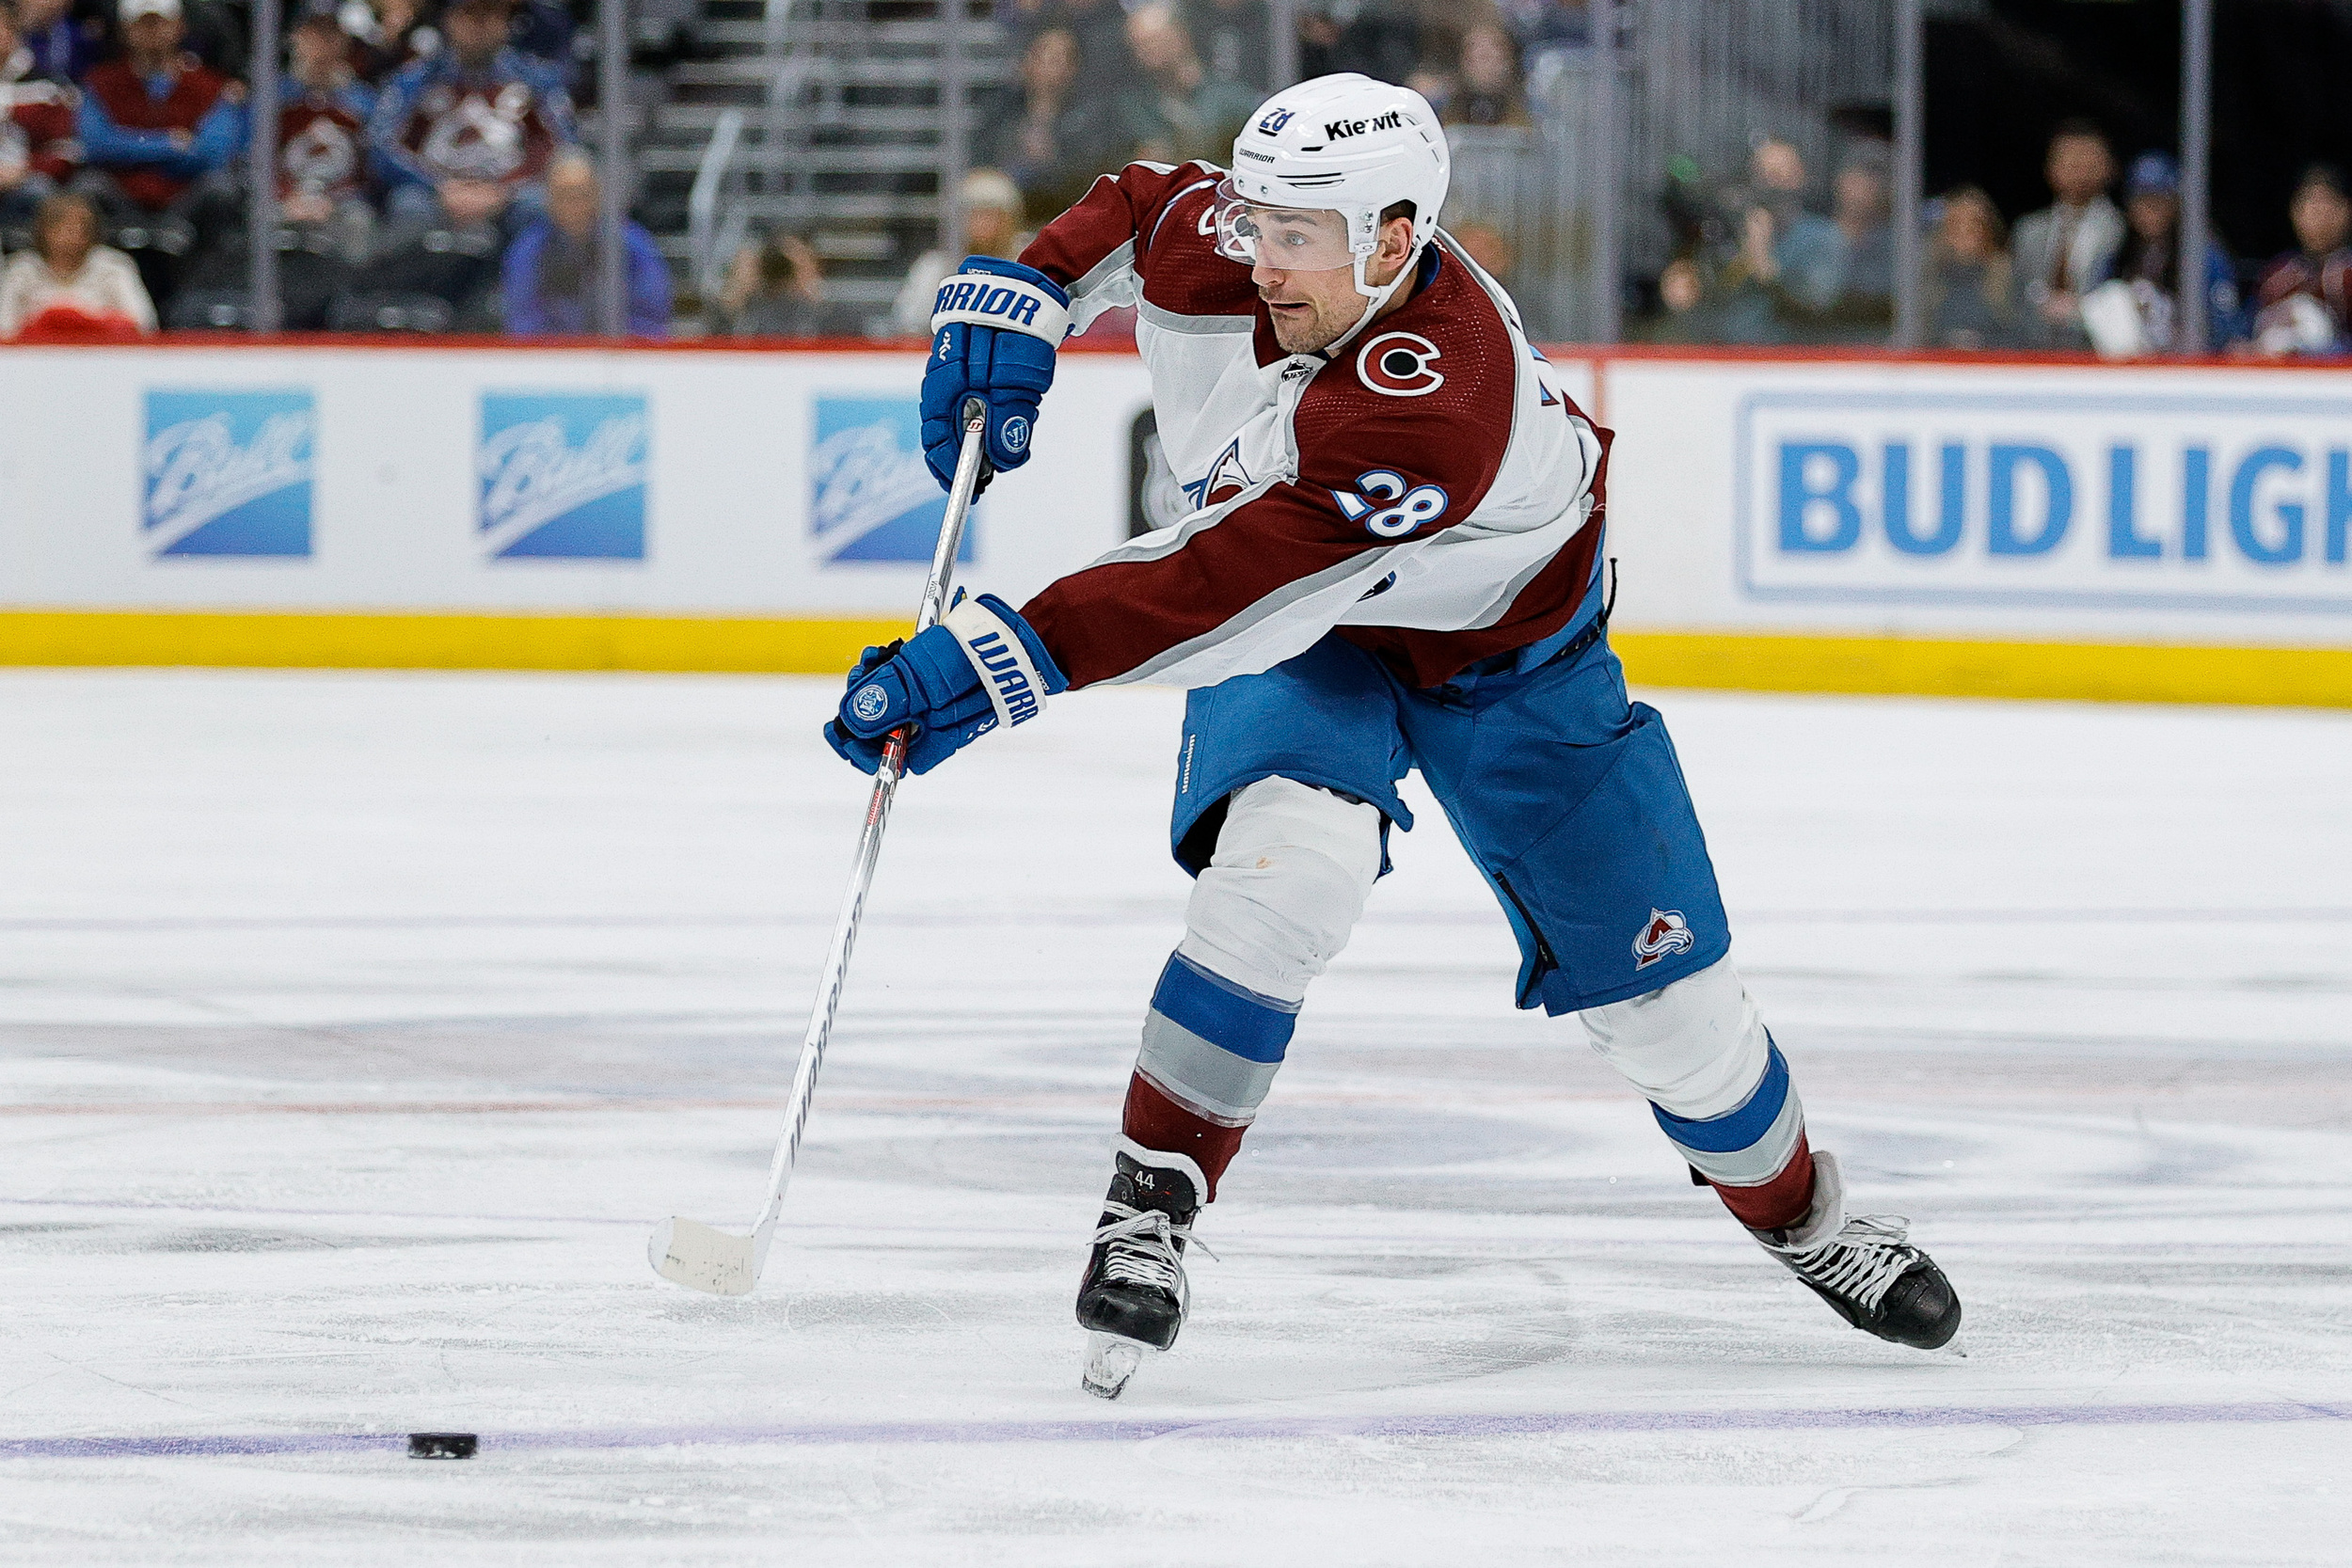 watch: overtime goal completes avalanche's comeback in 4-3 win over stars